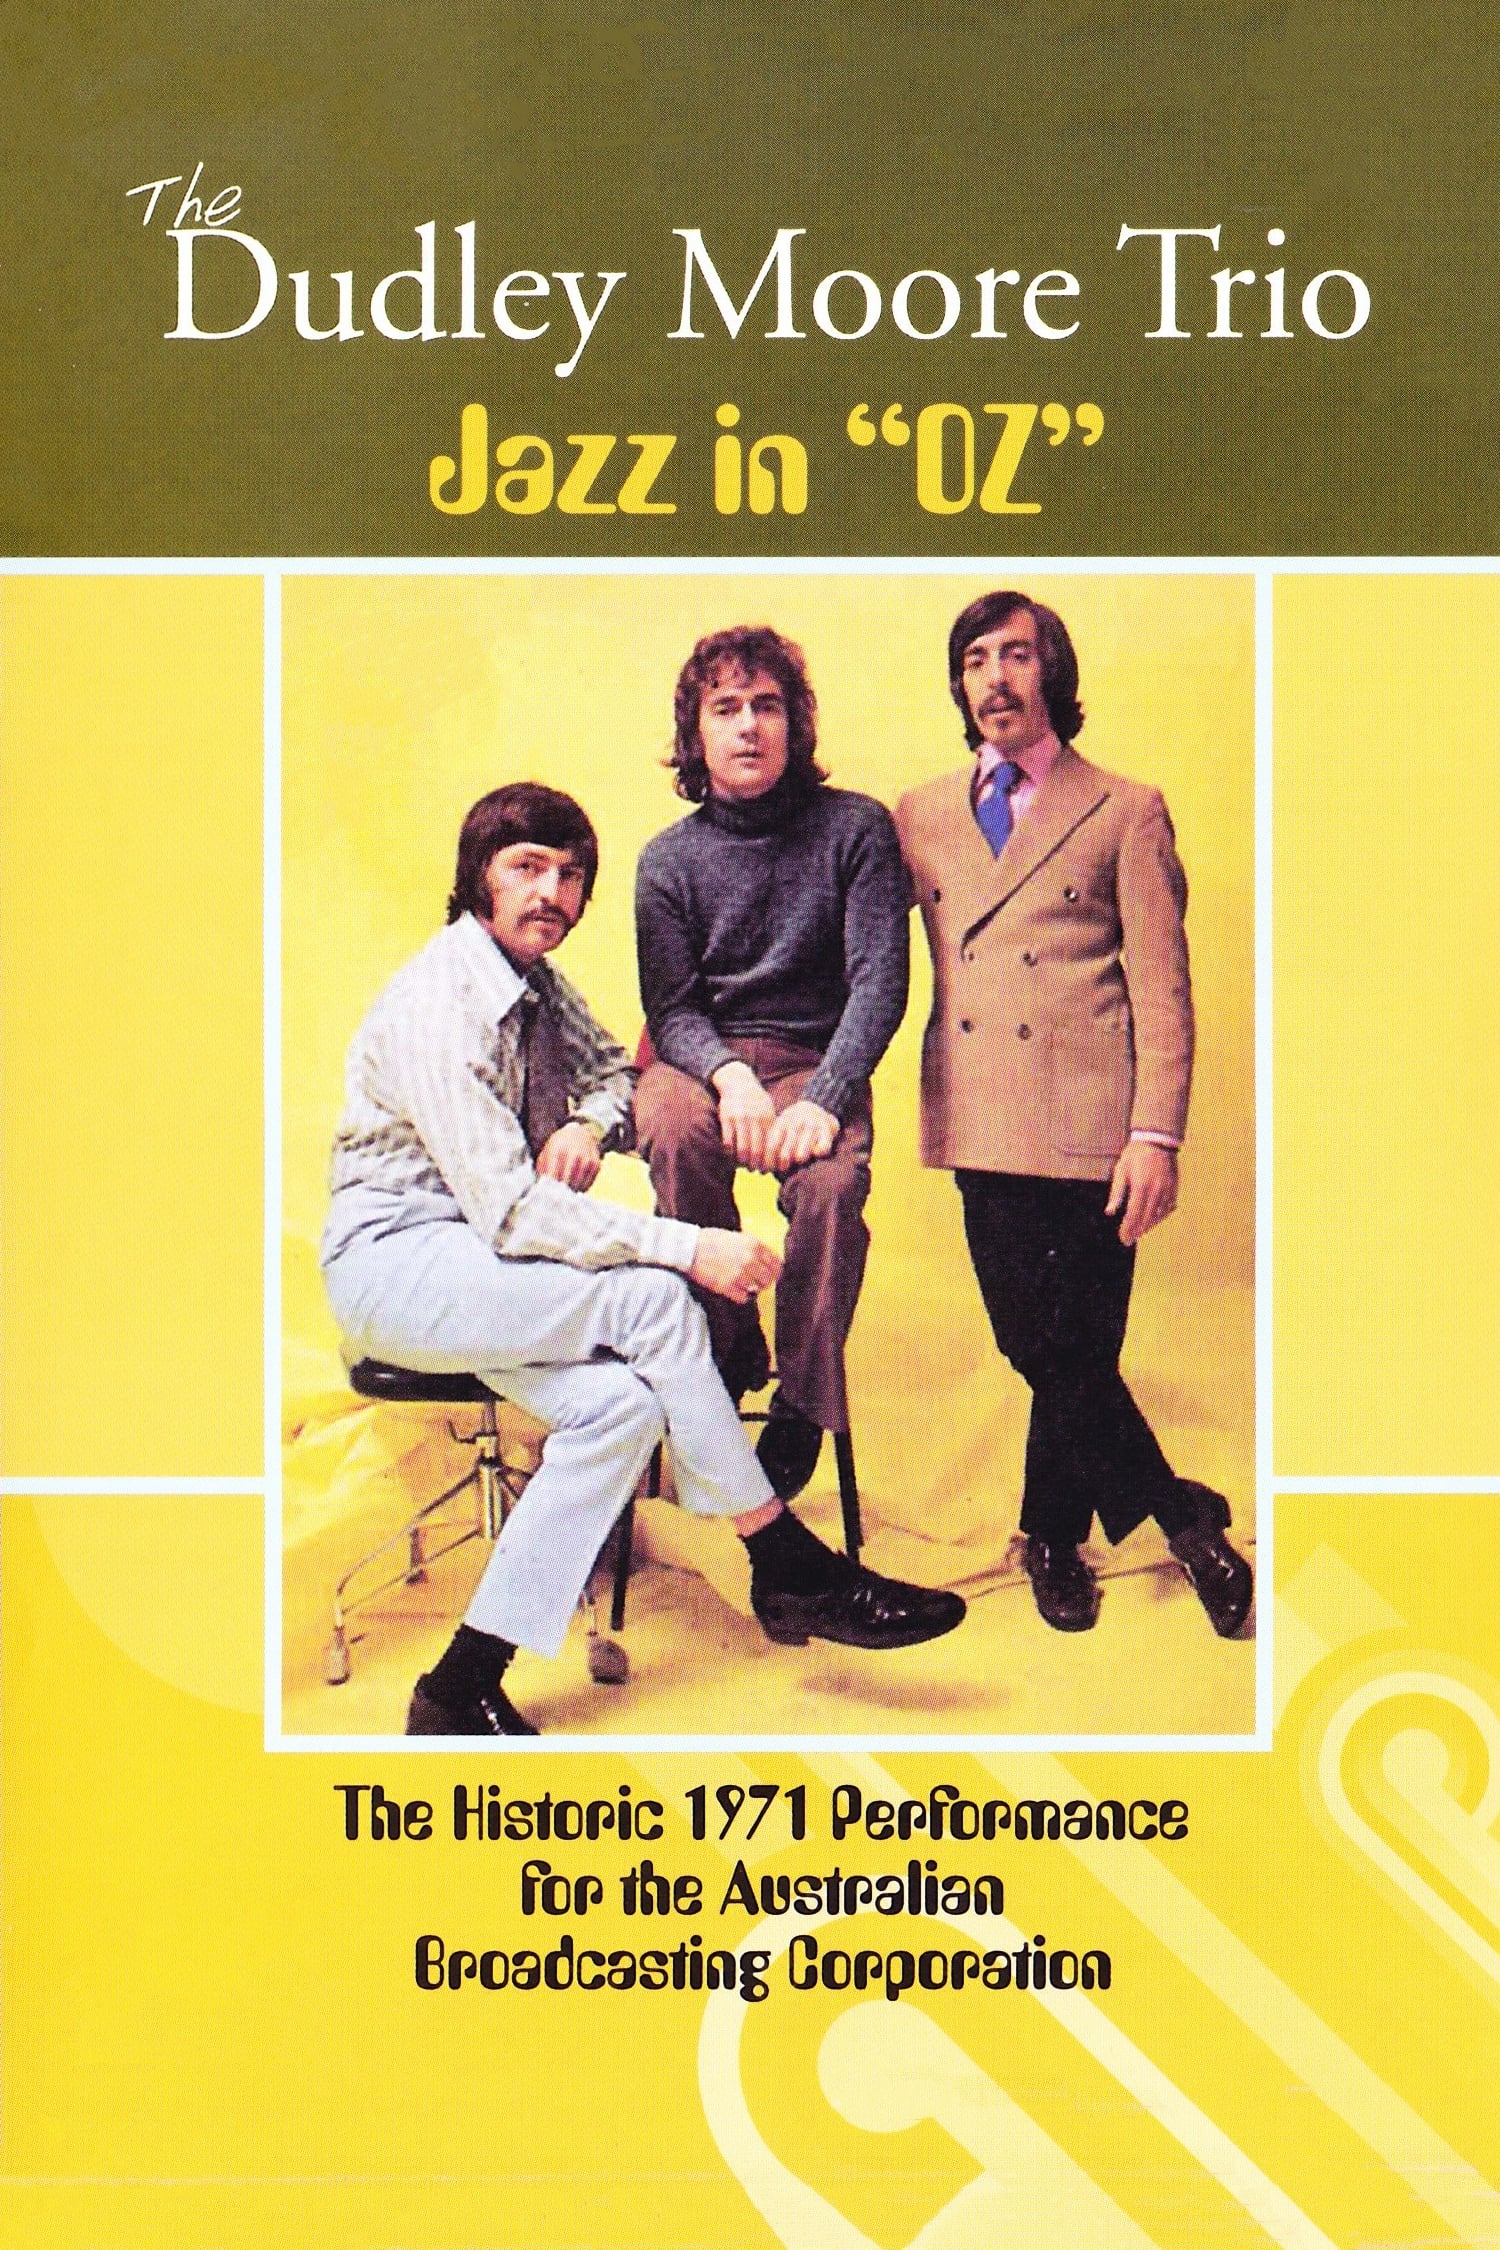 The Dudley Moore Trio - Jazz in "Oz"